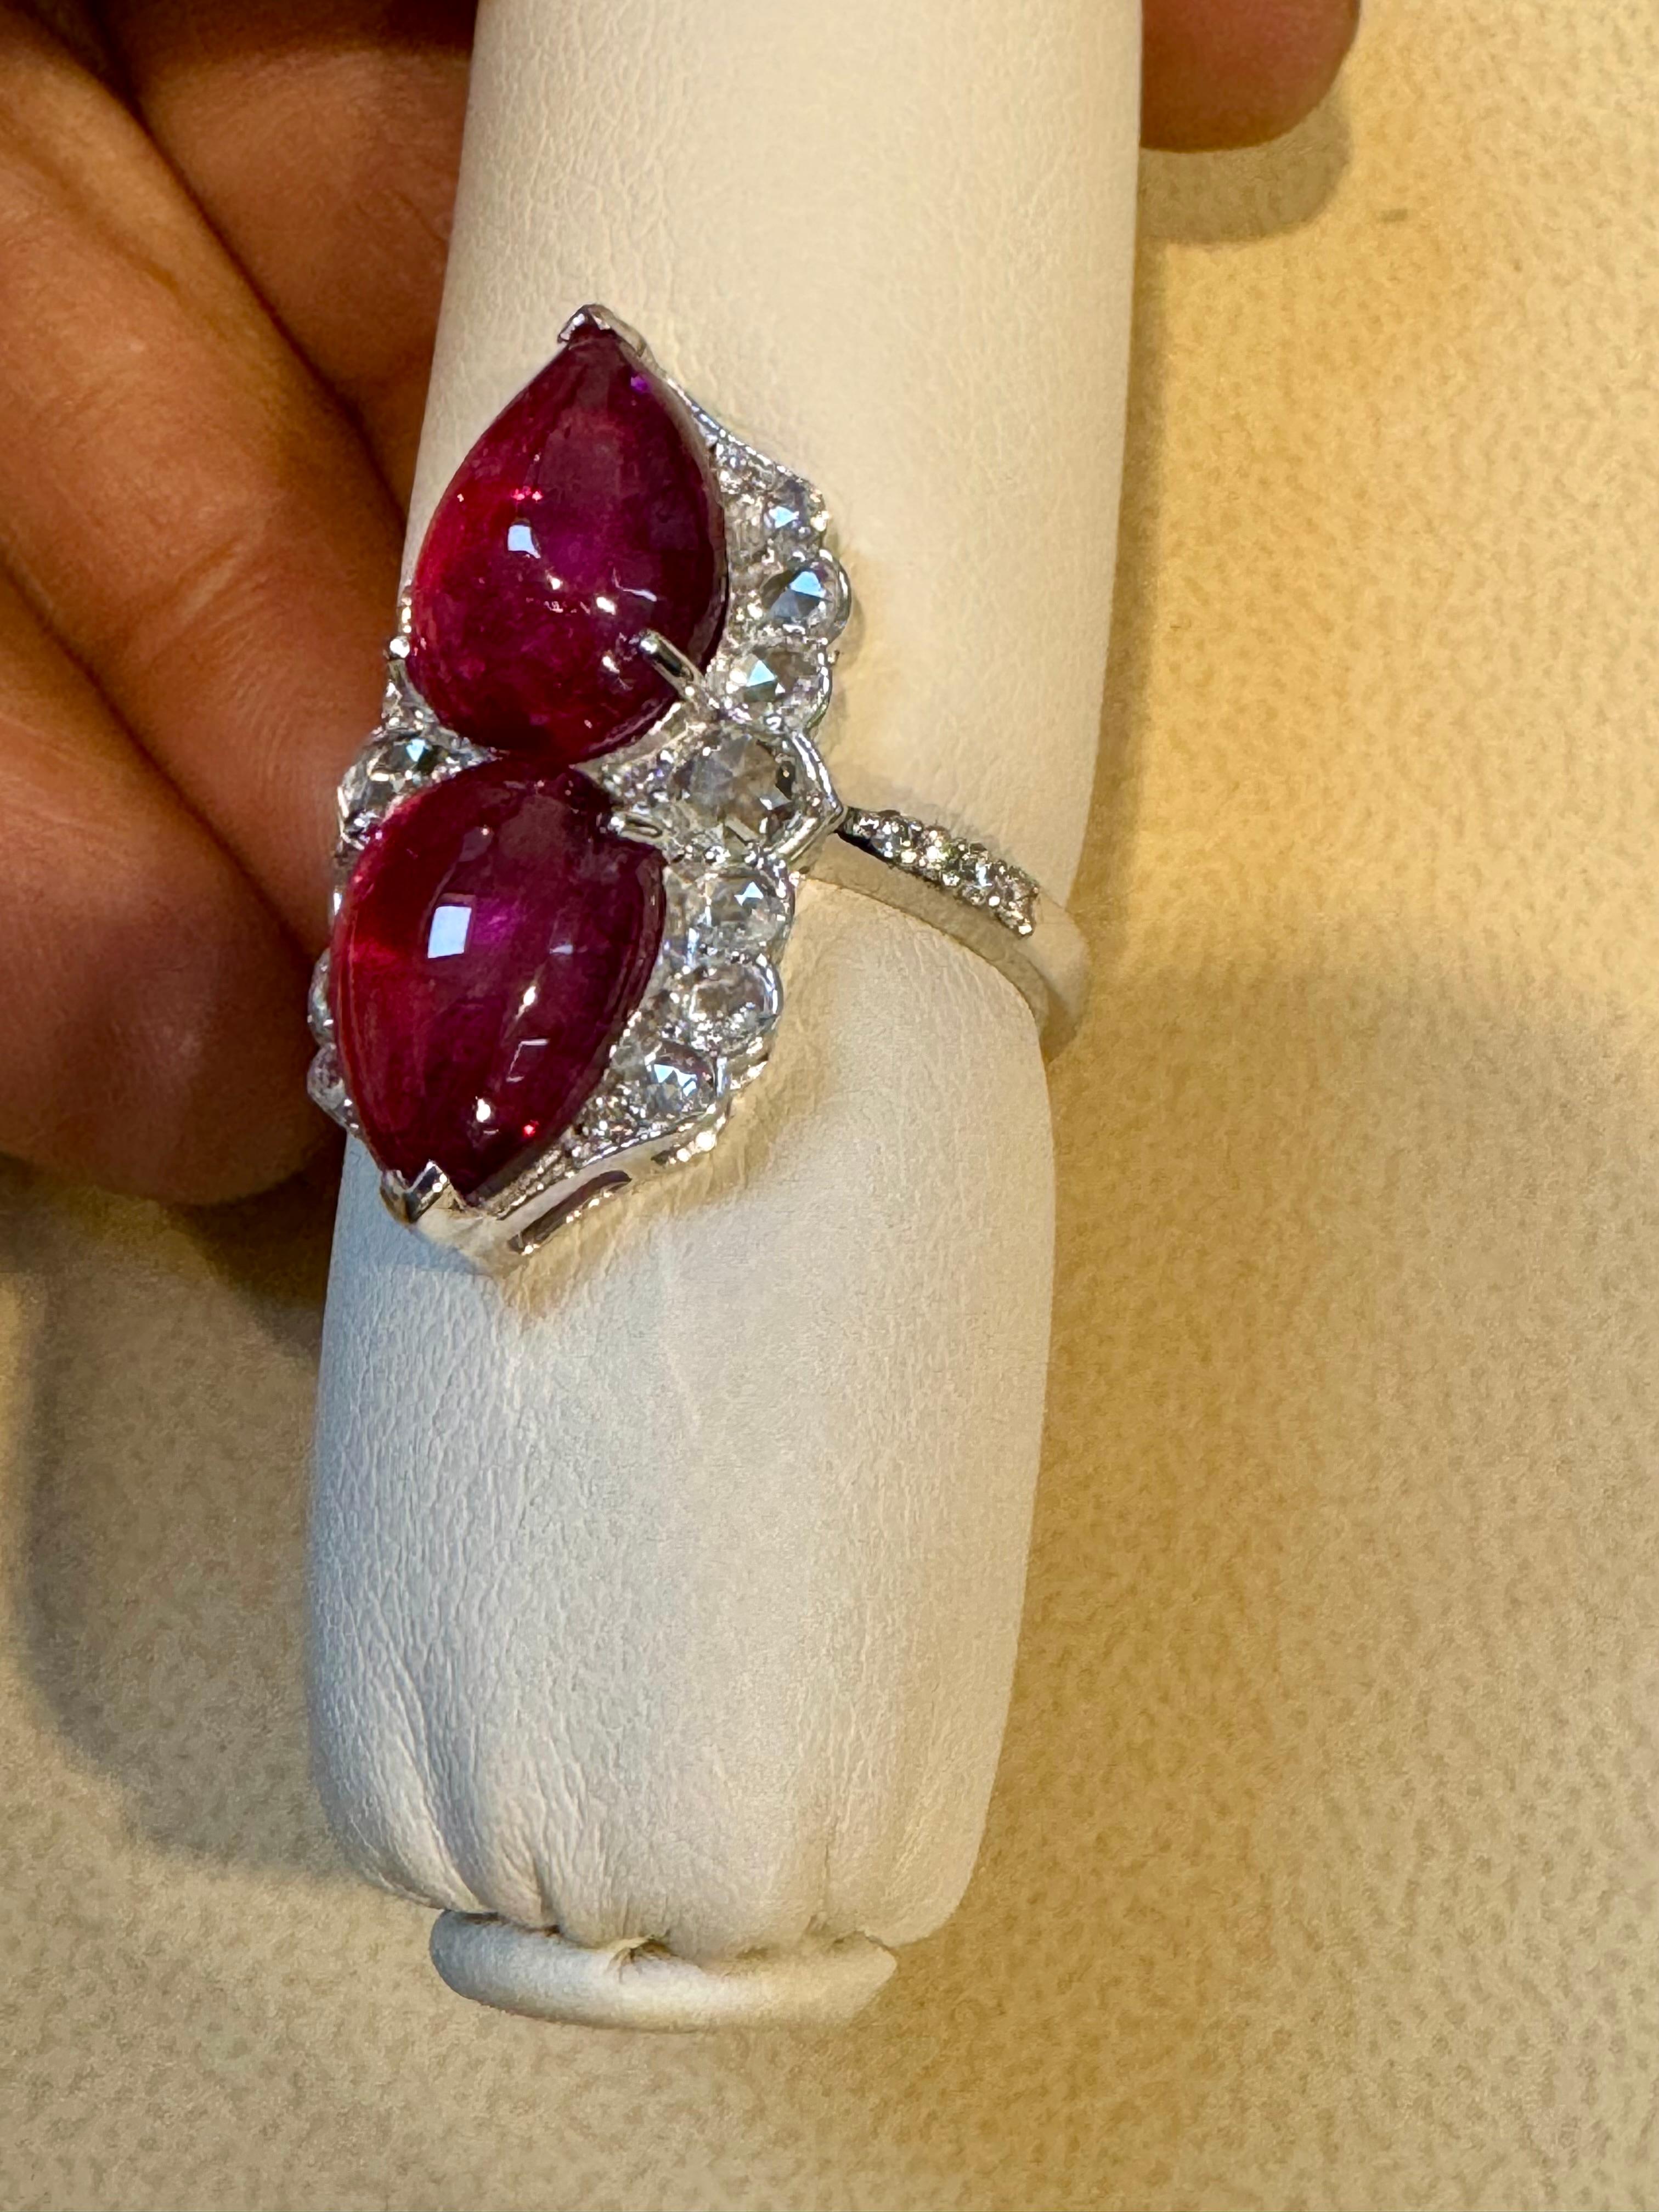 7 Ct Finest Rubelite Cabochon 1 Ct Diamond 18 Kt White Gold Cocktail Ring Size 6 For Sale 8